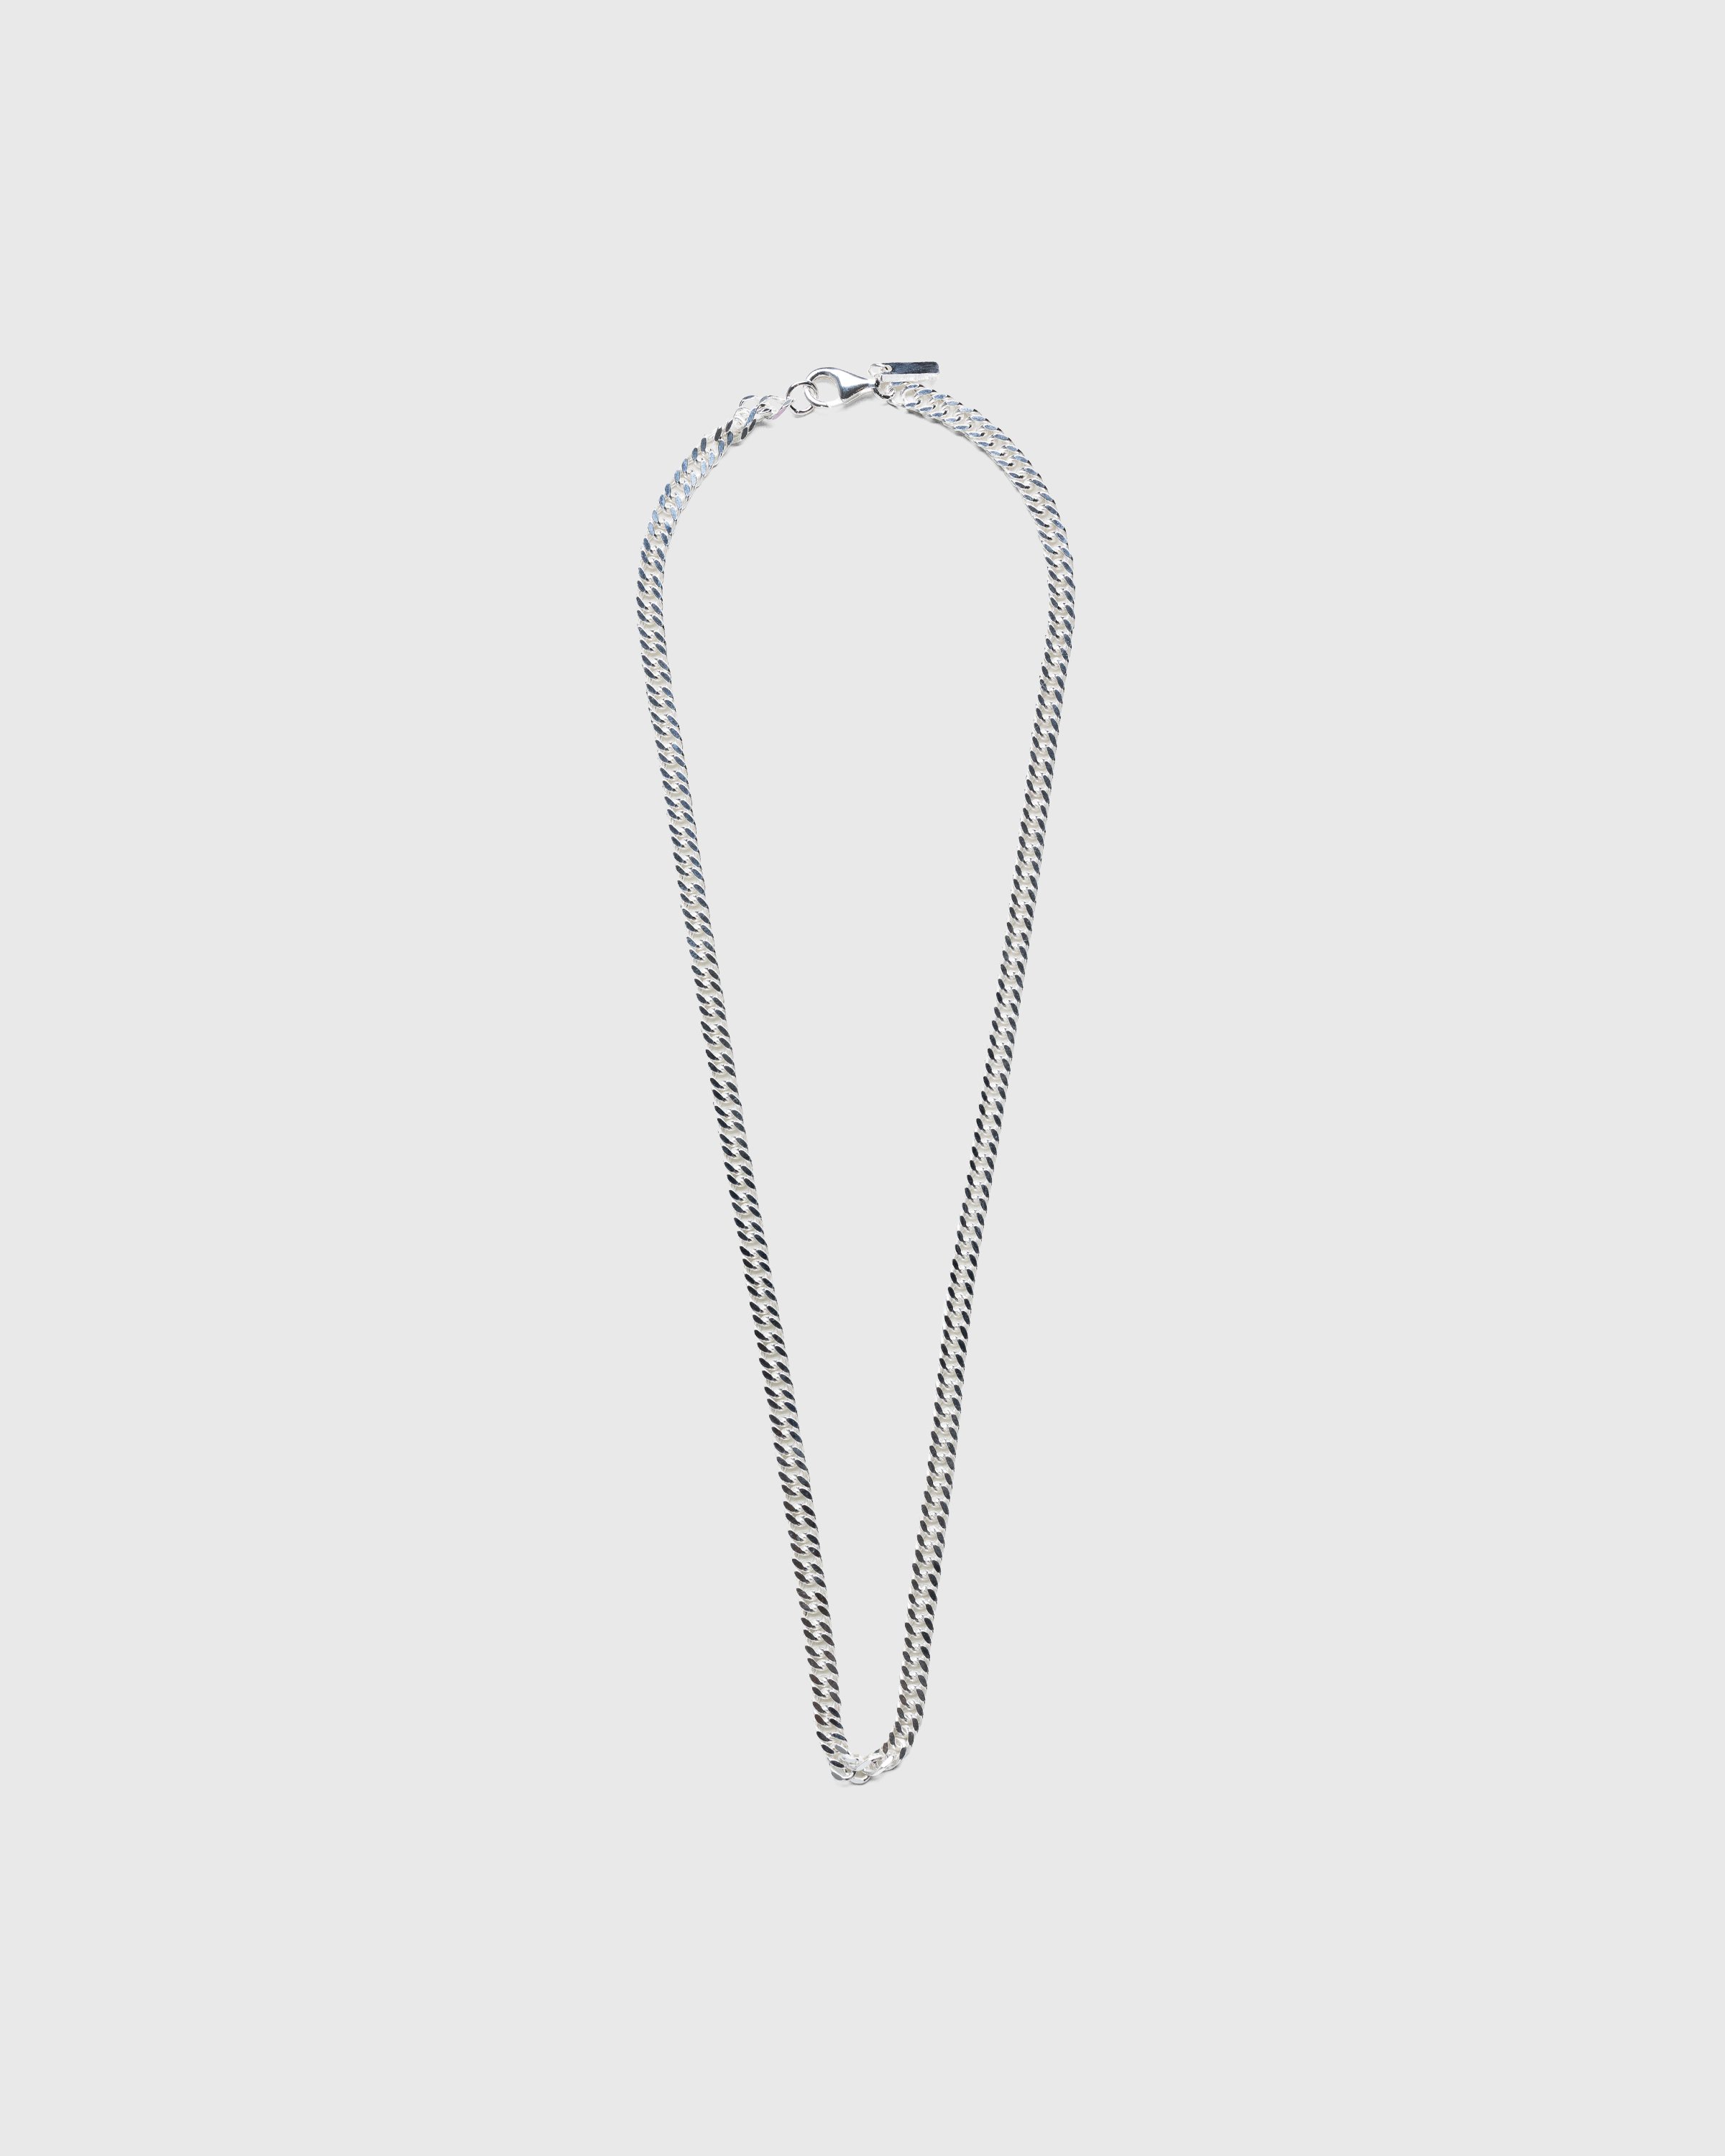 HATTON LABS, Rope Sterling Silver Chain Necklace, Men